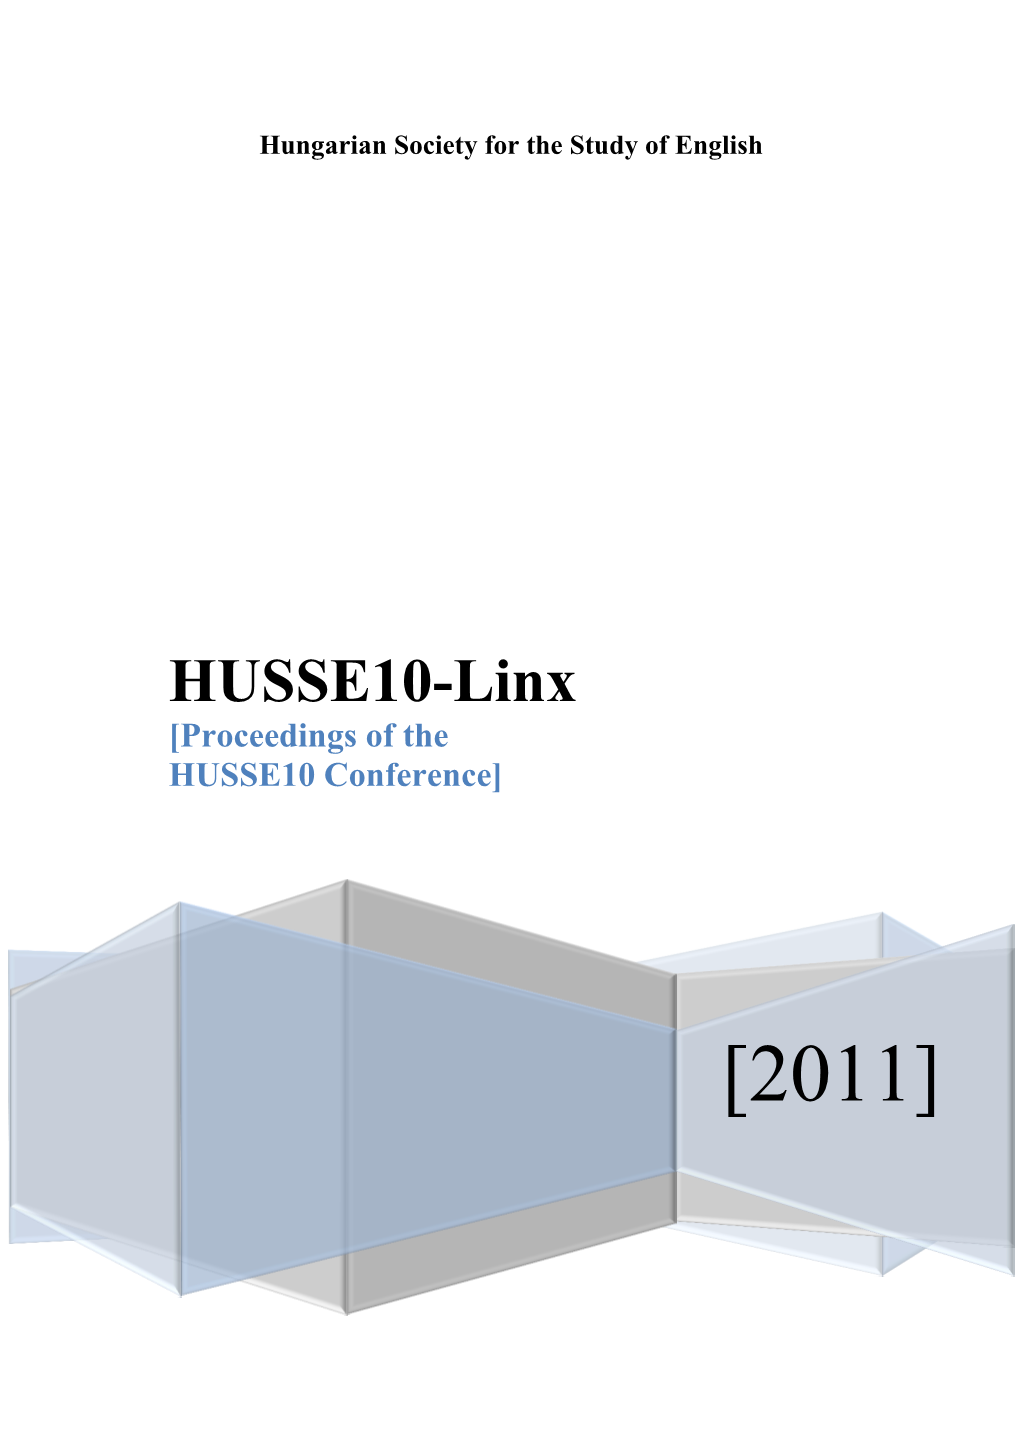 HUSSE10-Linx [Proceedings of the HUSSE10 Conference]